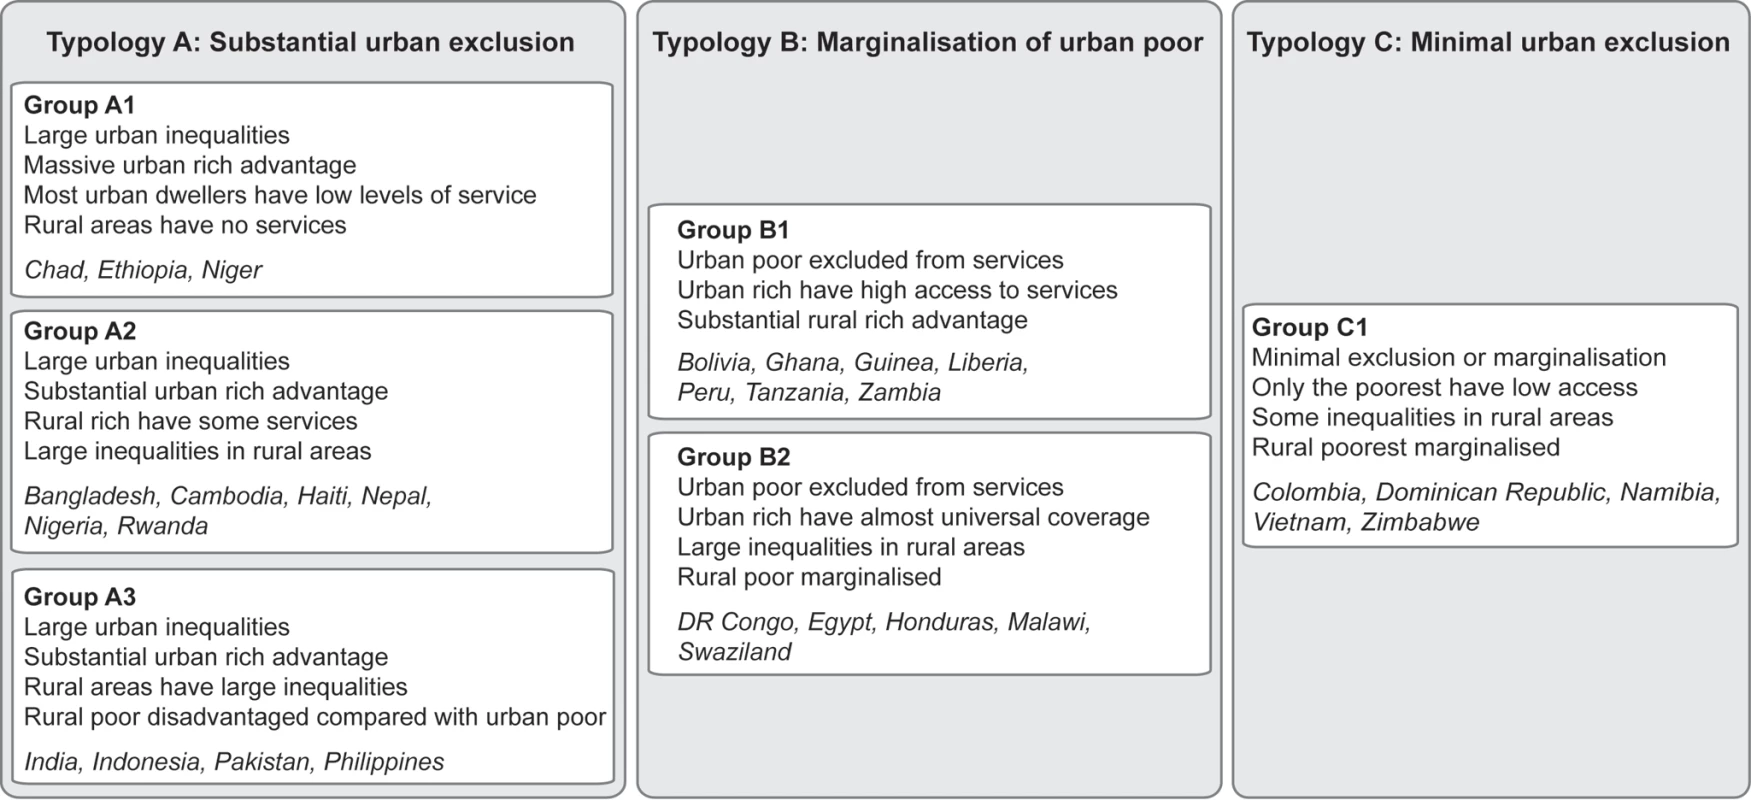 Typologies for urban coverage of maternal-newborn services.